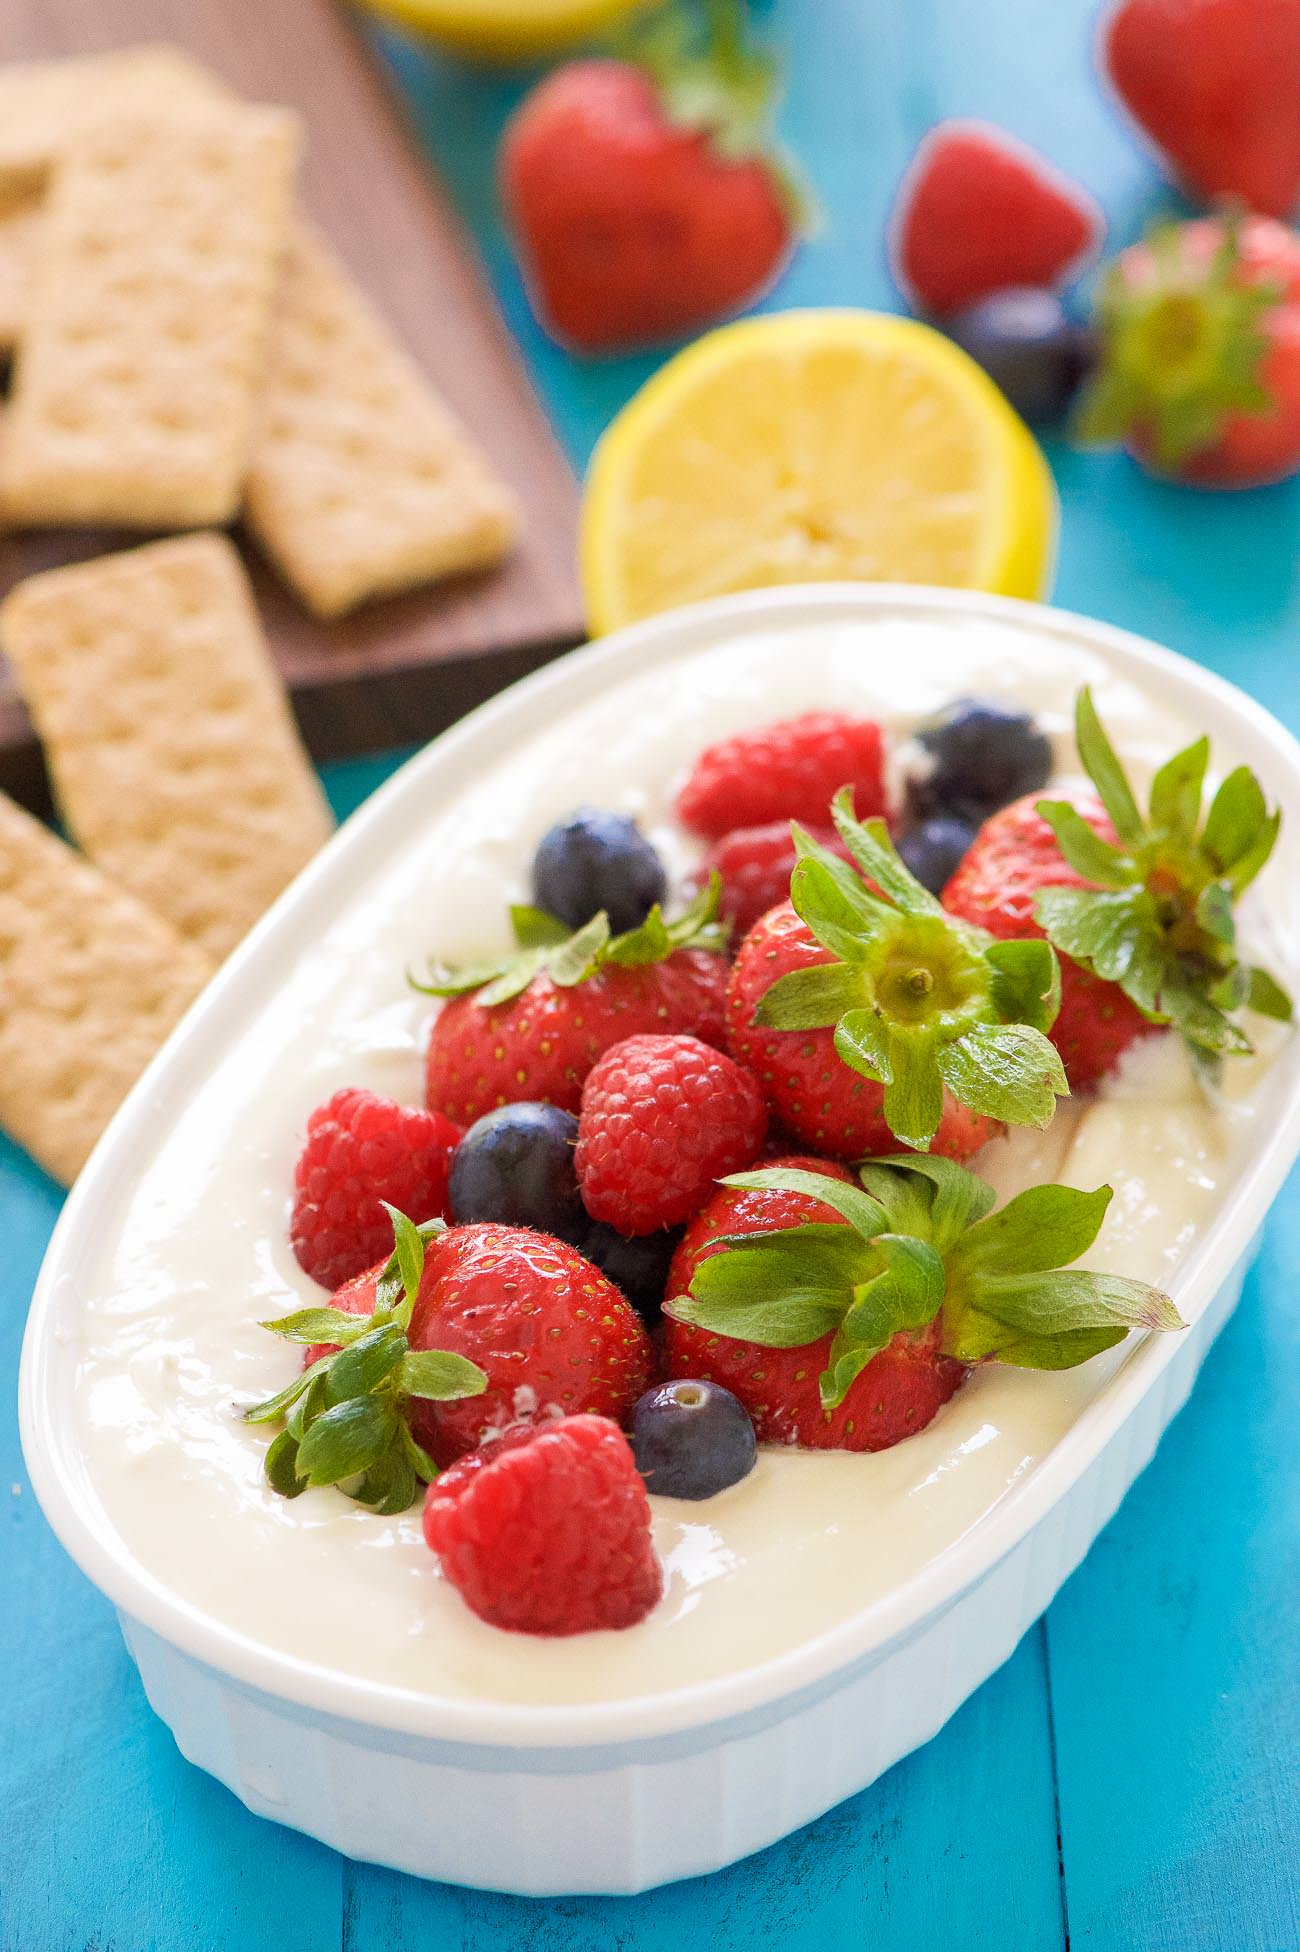 Lemon Berry Cheesecake Dip is the best of both words - dessert and a dip! Luscious, creamy cheesecake dip with a hint of lemon is topped with juicy berries coated in a touch of maple syrup! An irresistible combination that will be the hit of any party!